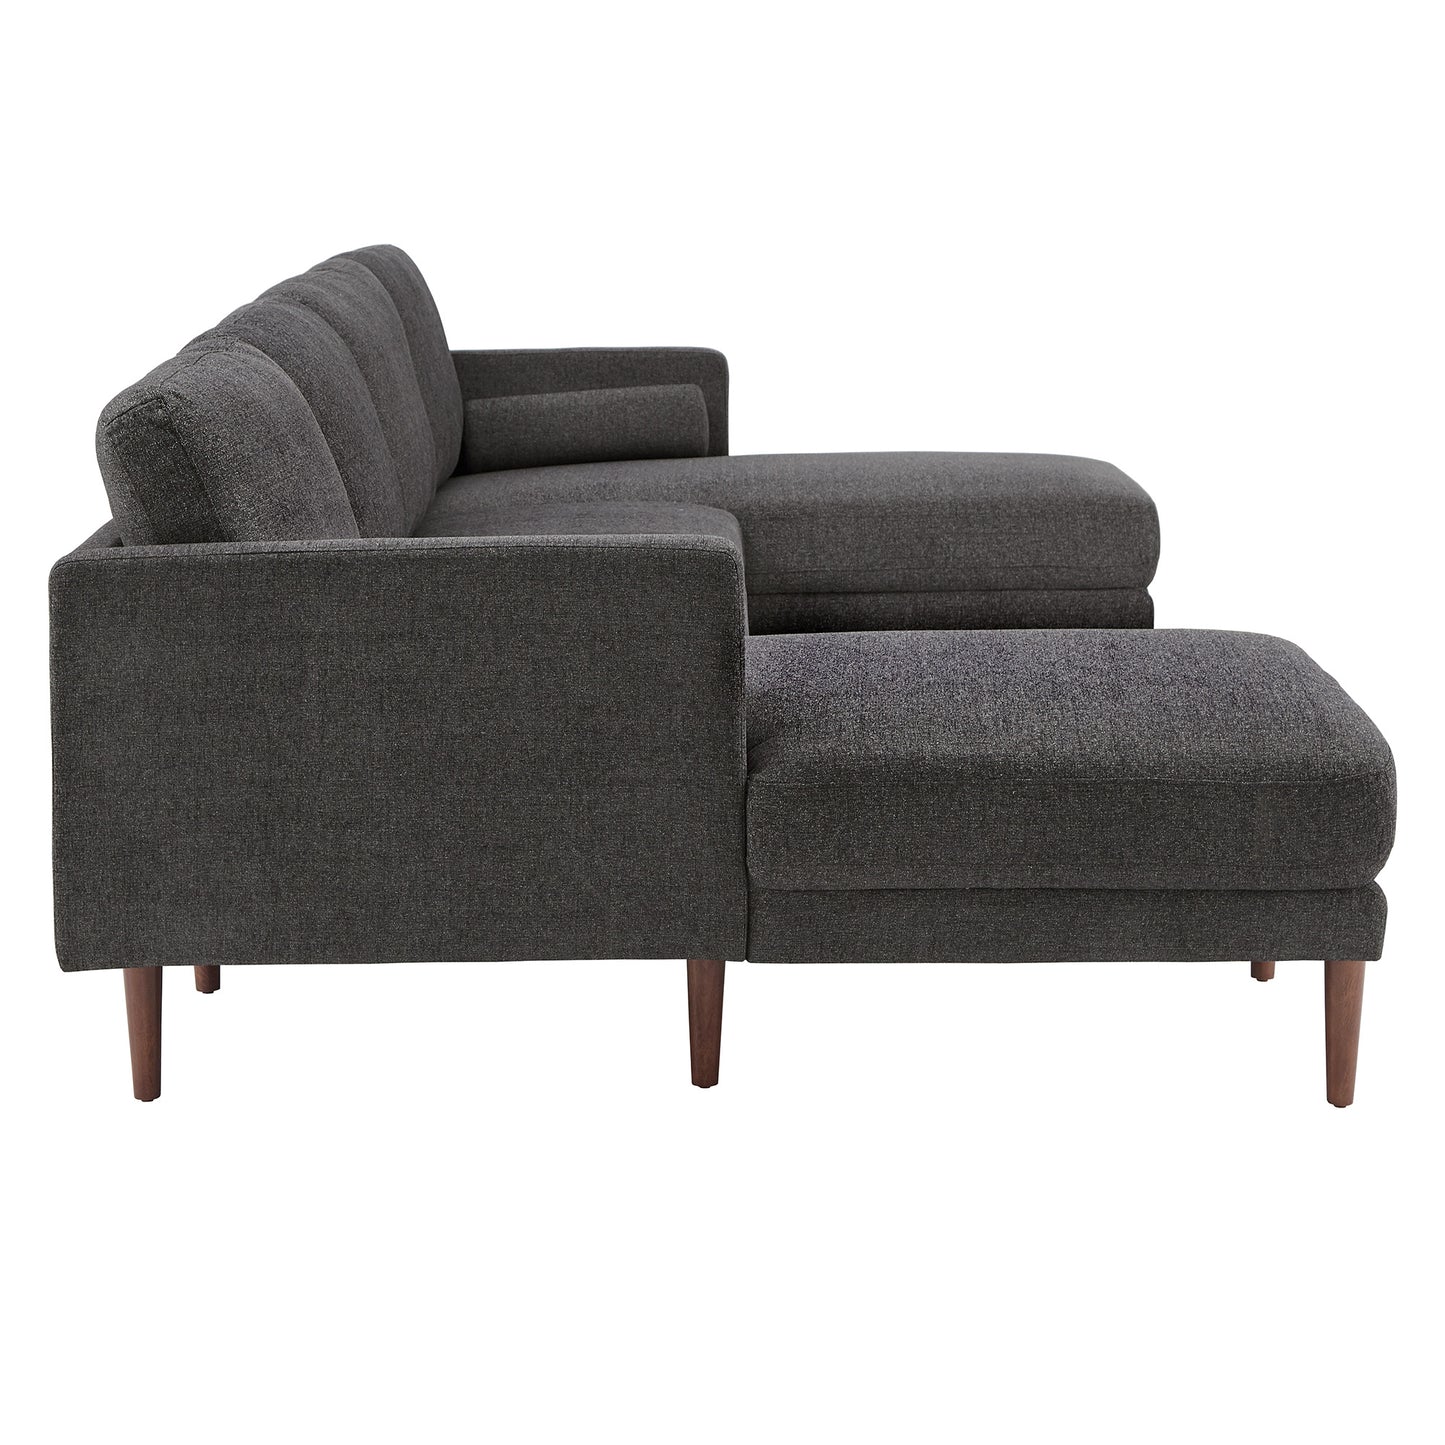 Mid-Century Upholstered Sectional Sofa - Black, 4-Seat Sectional with Two Chaises